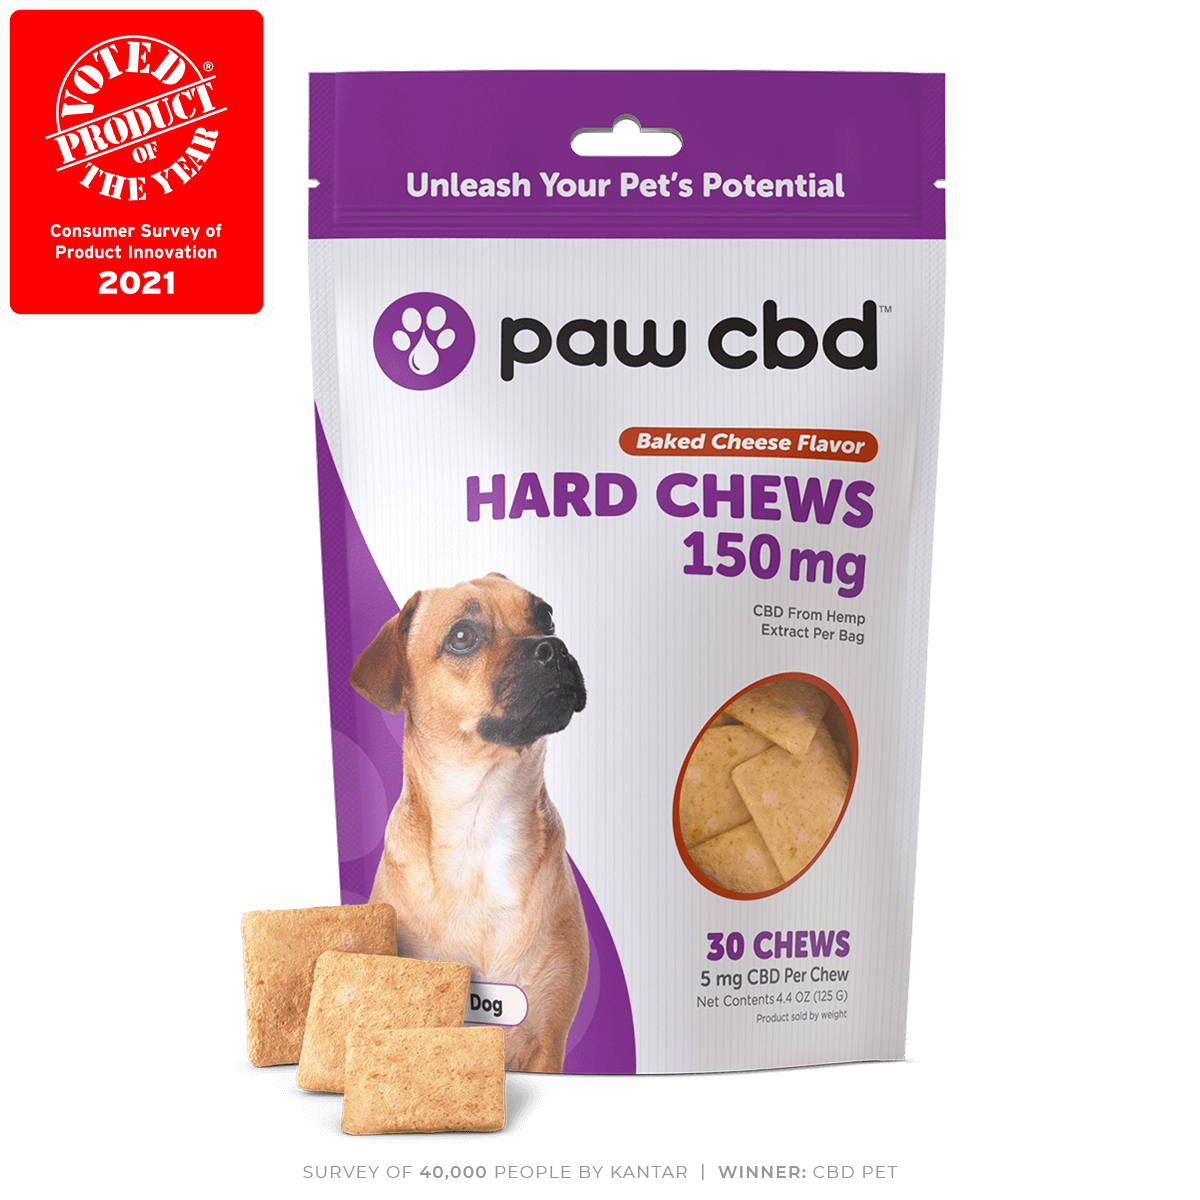 CbdMD Pet CBD Oil Hard Chews for Dogs Baked Cheese 150mg, 30 Count